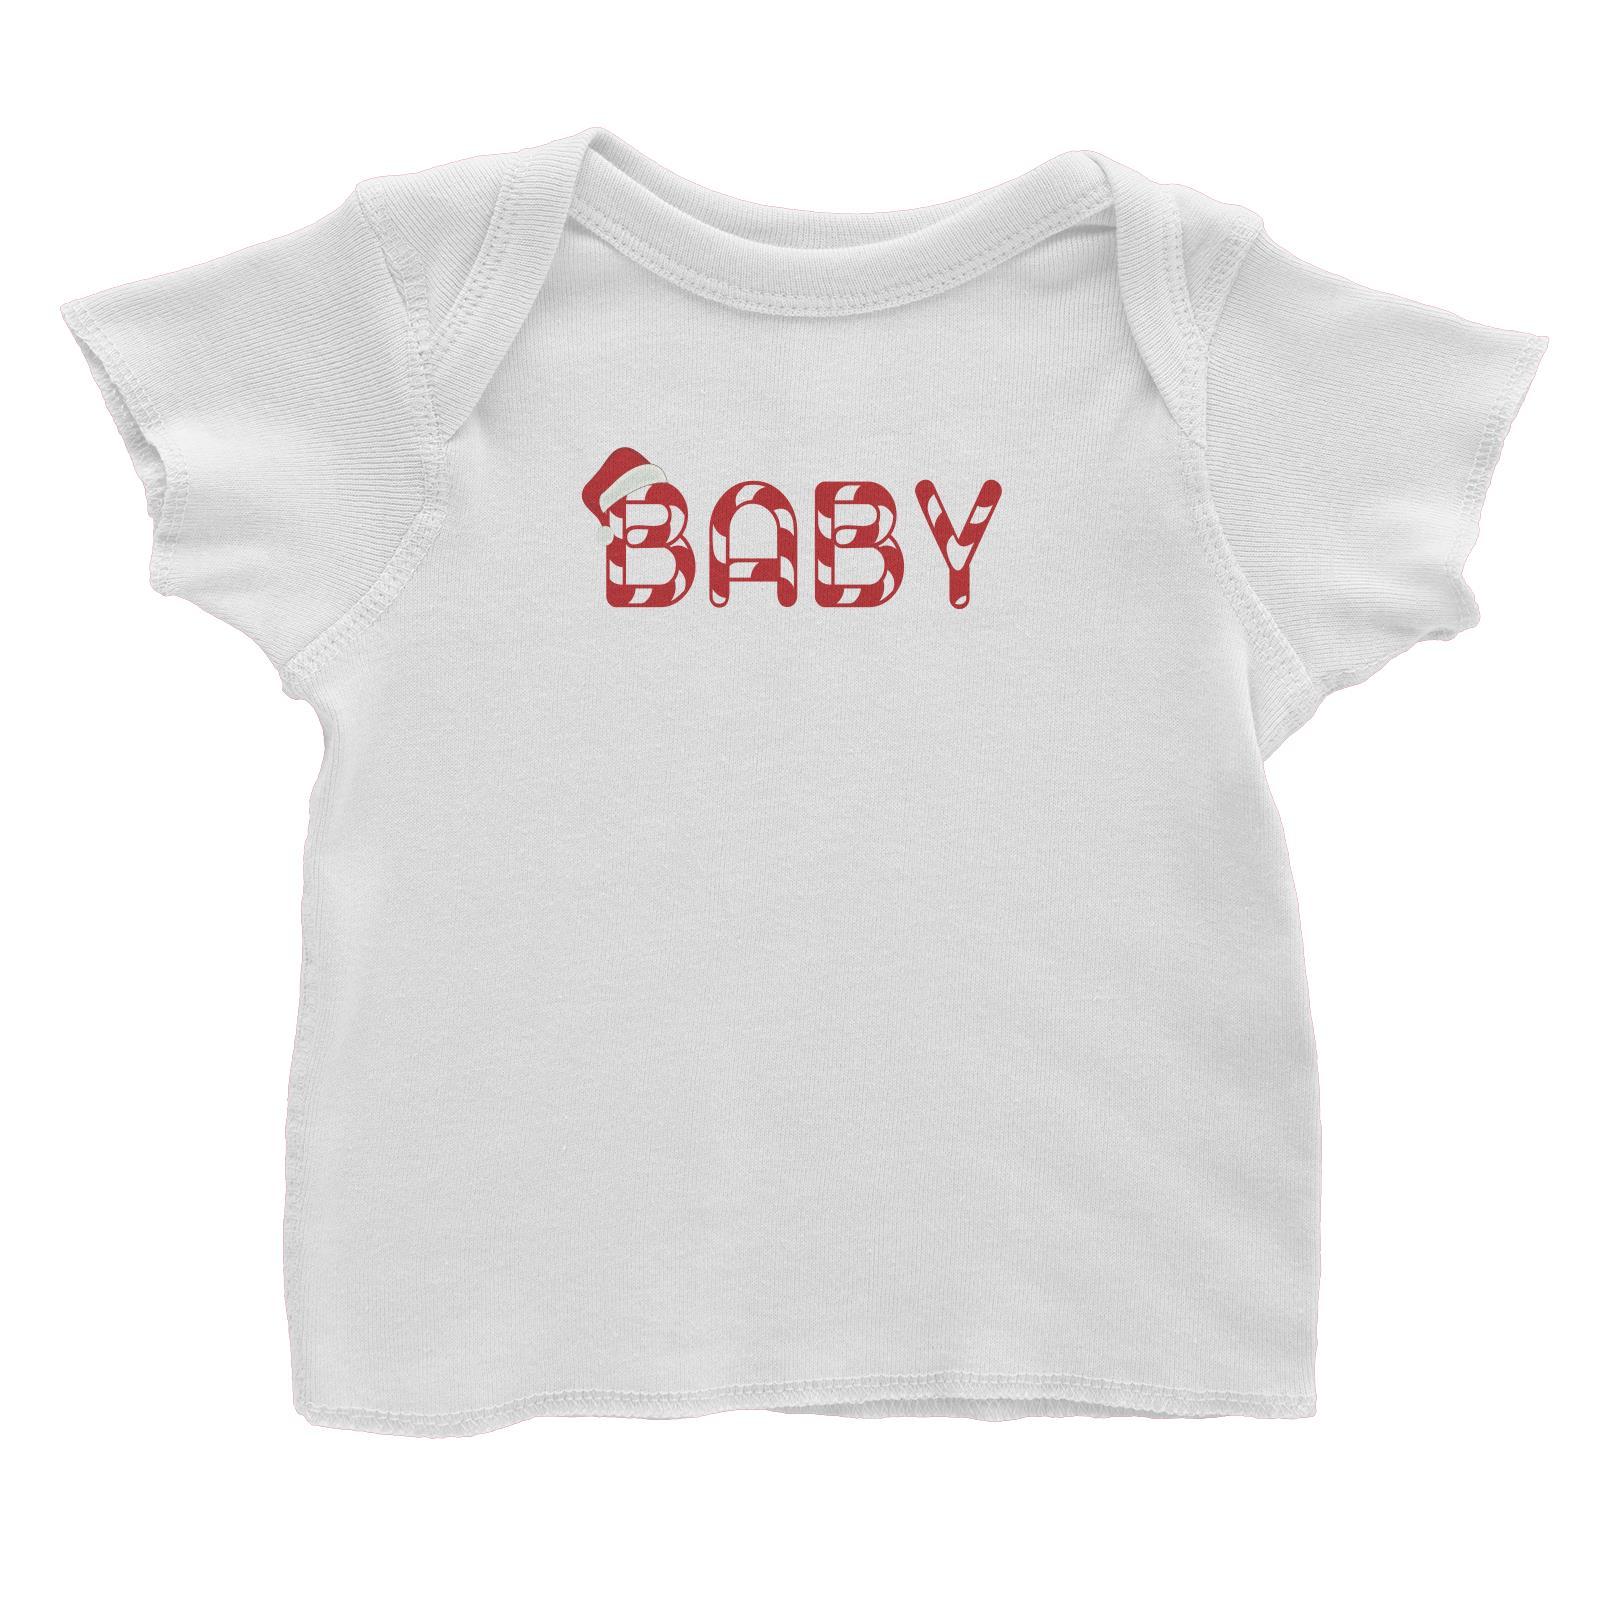 Candy Cane Alphabet Baby with Santa Hat Baby T-Shirt